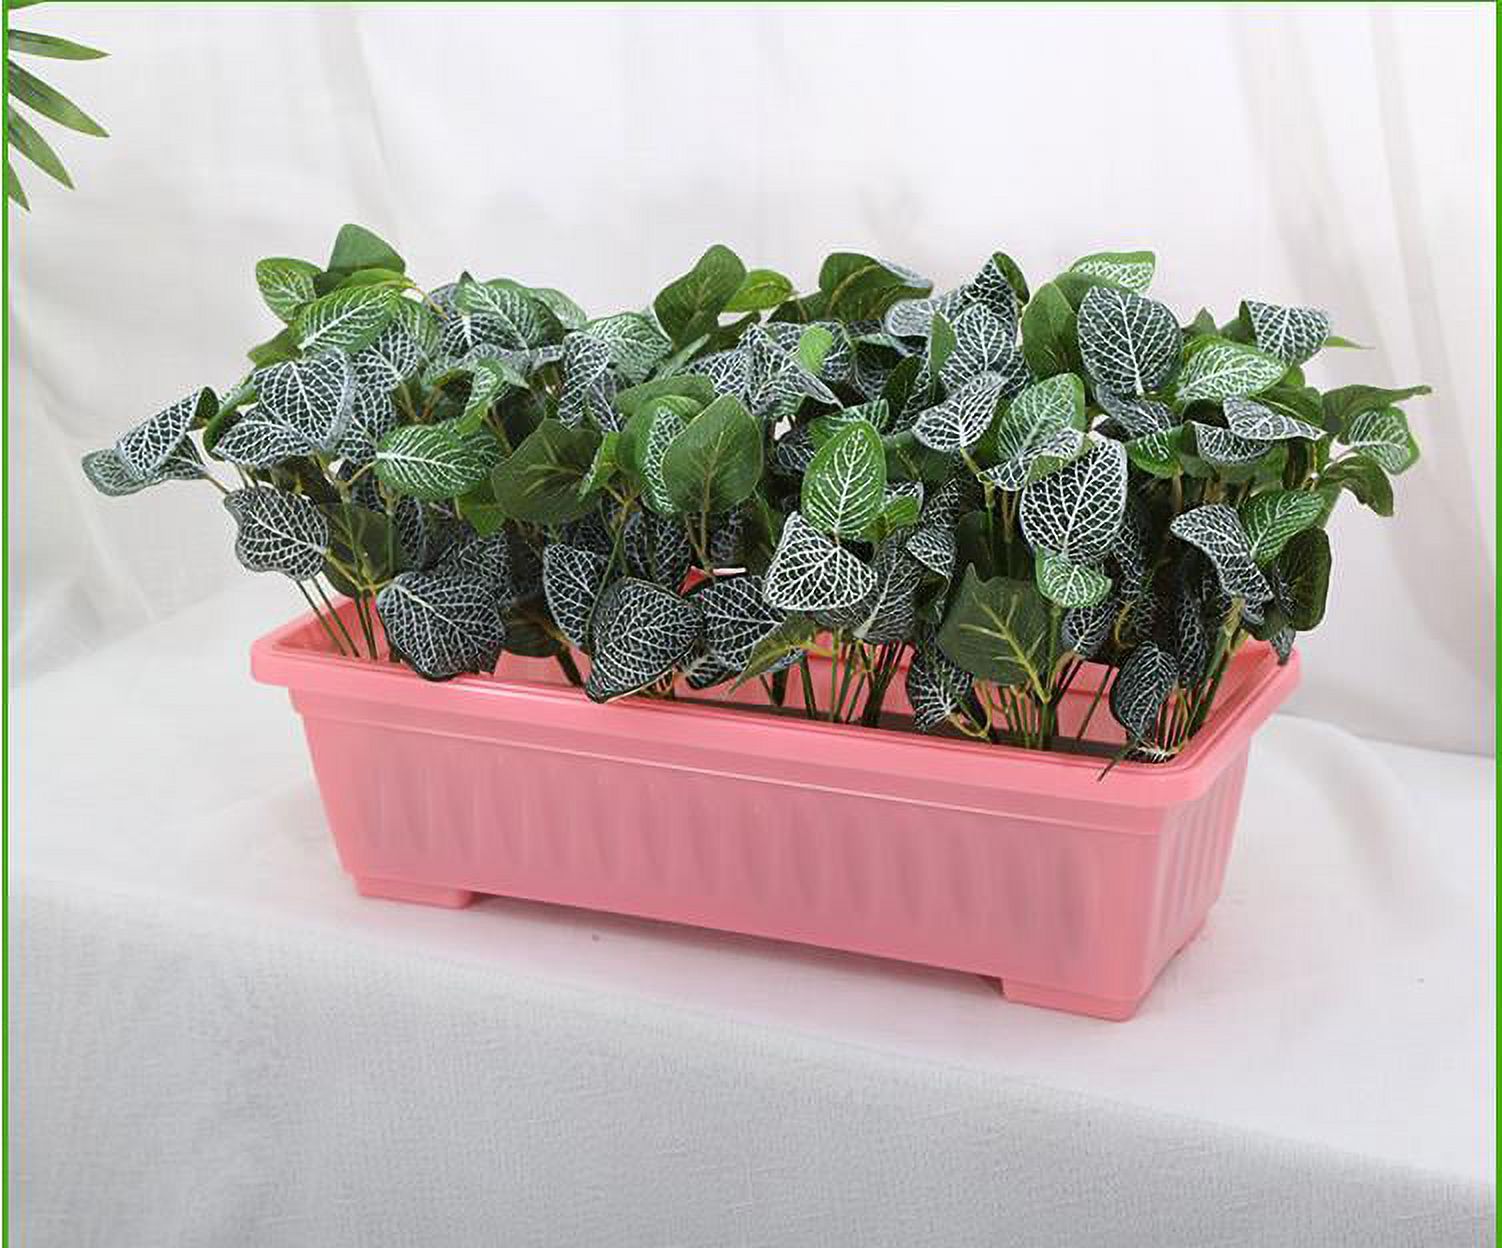 17 Inch Rectangular Plastic Thicken Planters with Trays - Window Planter Box for Outdoor and Indoor Herbs, Vegetables, Flowers and Succulent Plants (1 Pack,Pink) - image 3 of 8